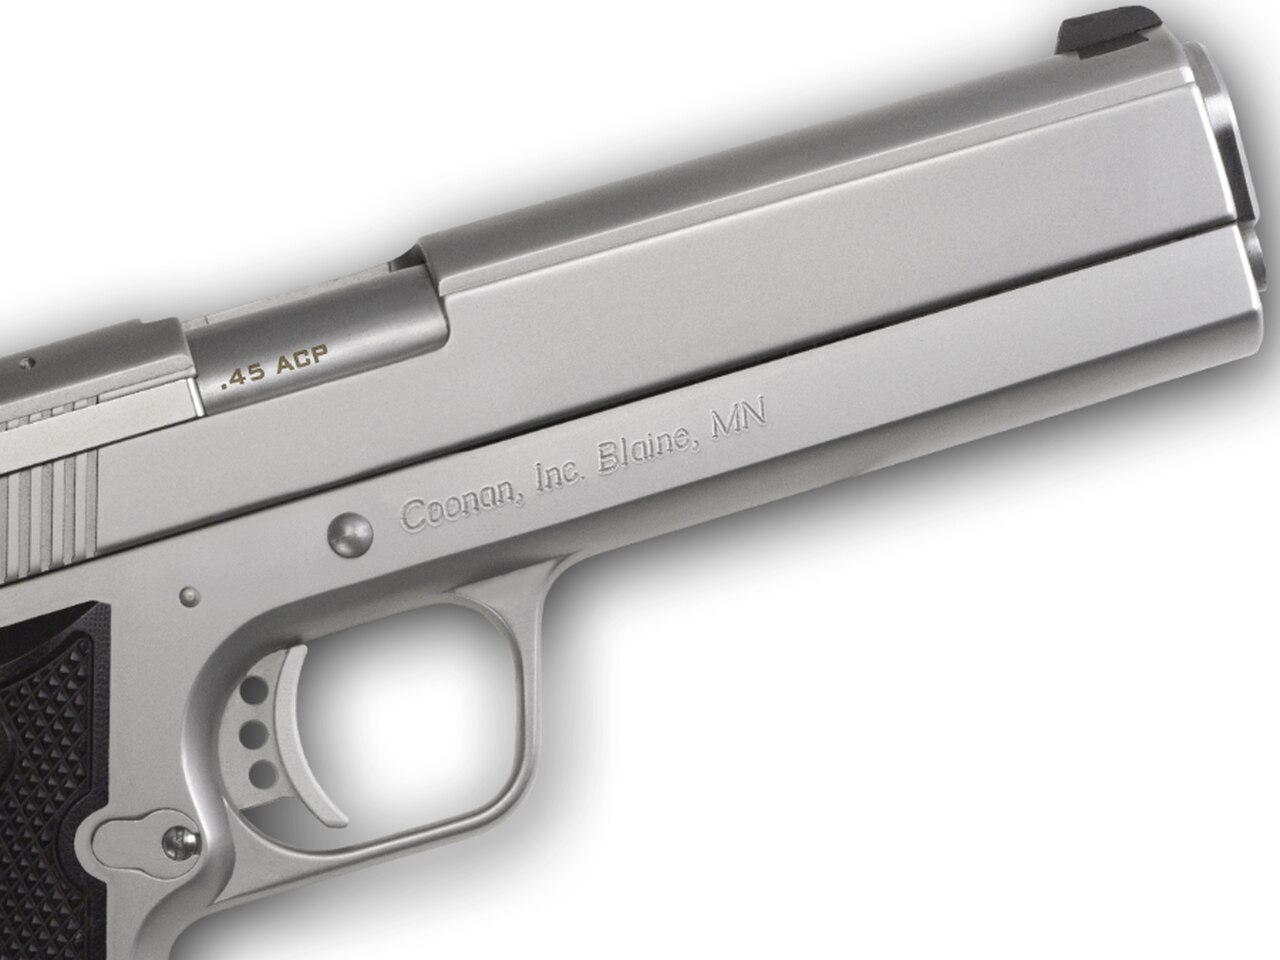 Image of Coonan MOT 45 ACP, 5", Satin Stainless, Adj. White Dot Sights, Black Alum Grips, 2 Mags (Special Order)